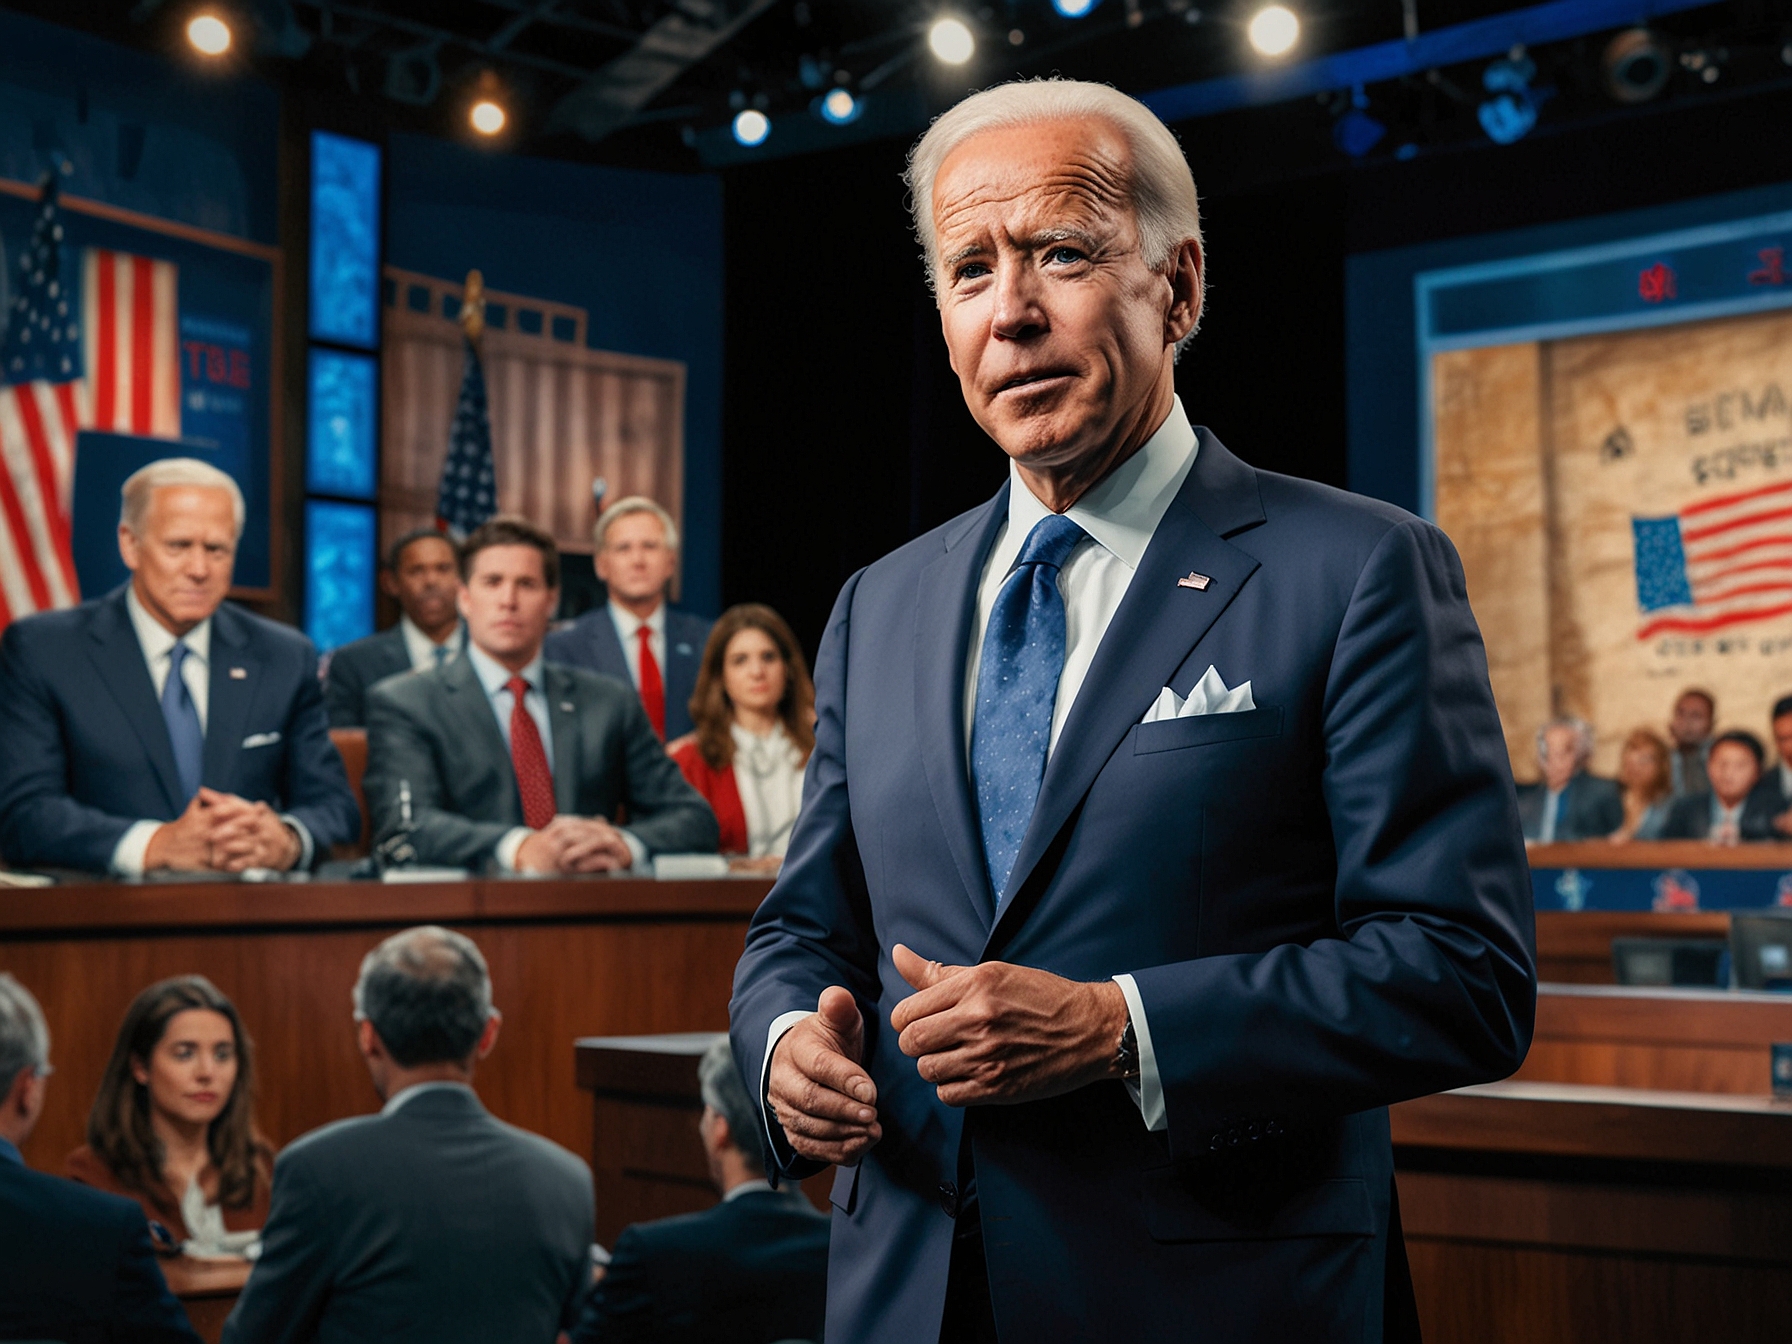 President Biden on stage during the debate, appearing unsteady and struggling with responses, as Democratic supporters in the background watch with apprehensive expressions.